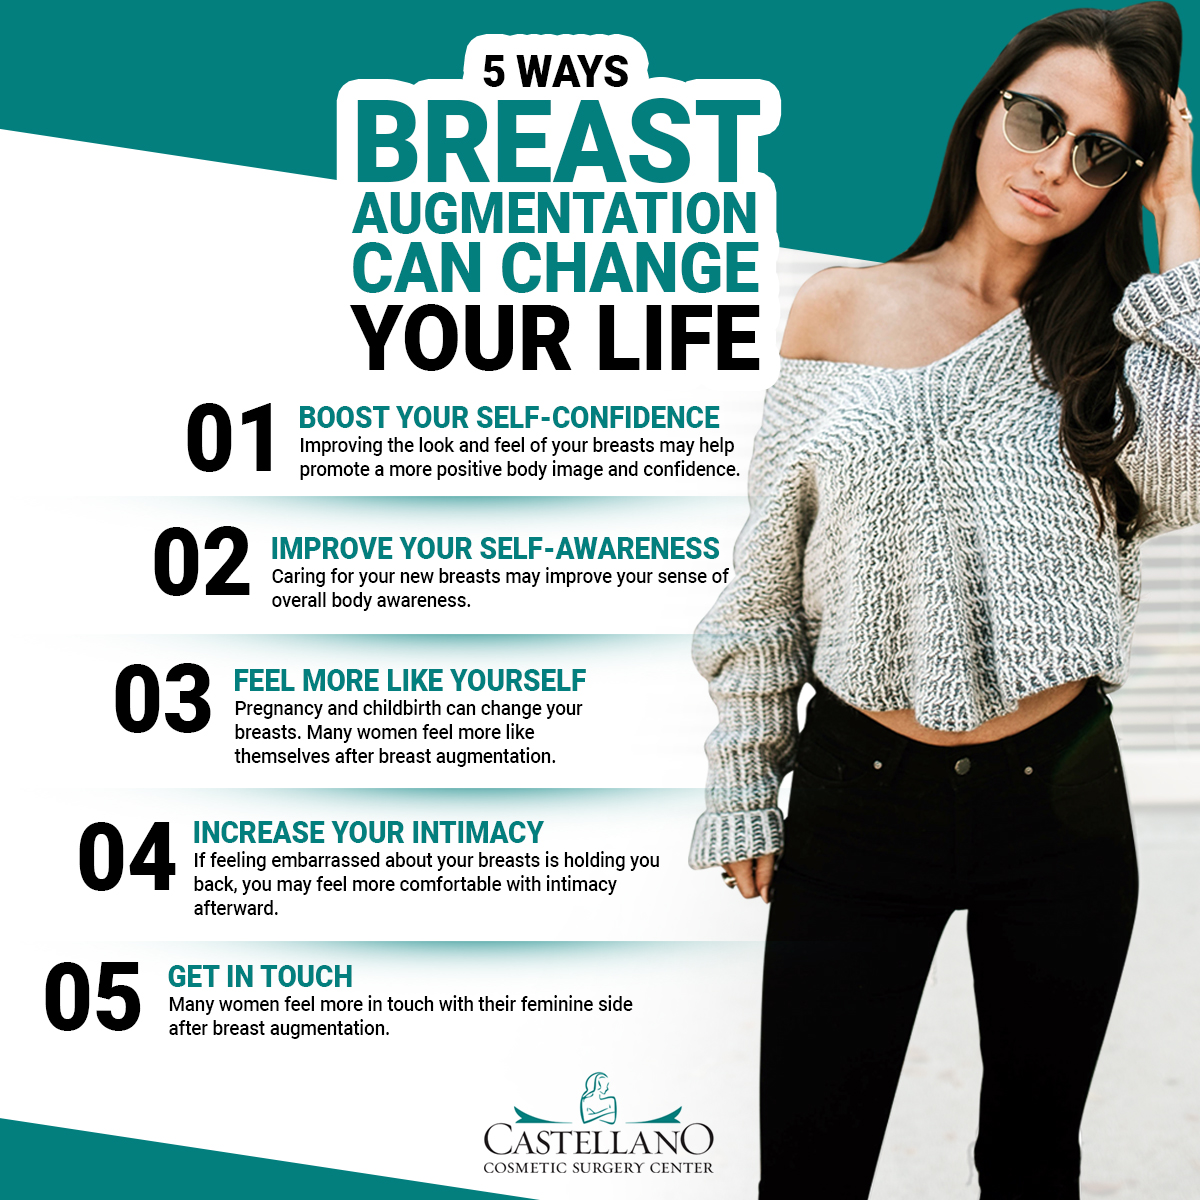 6 Ways Breast Augmentation Changes the Way You Look (Besides